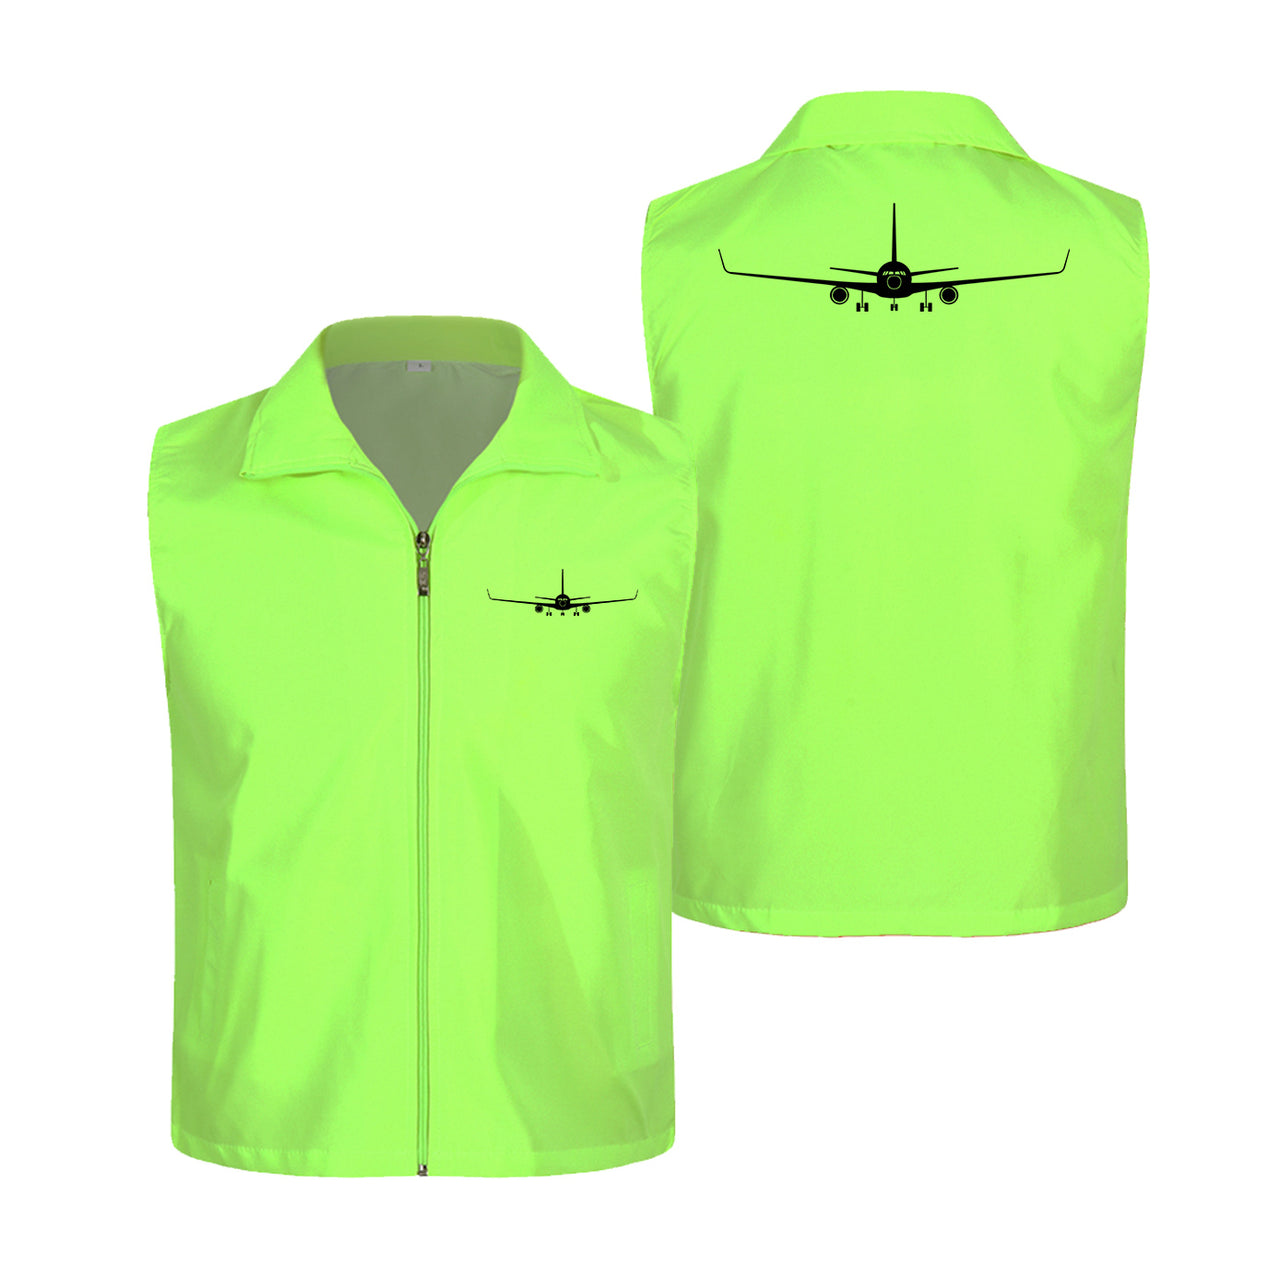 Boeing 767 Silhouette Designed Thin Style Vests